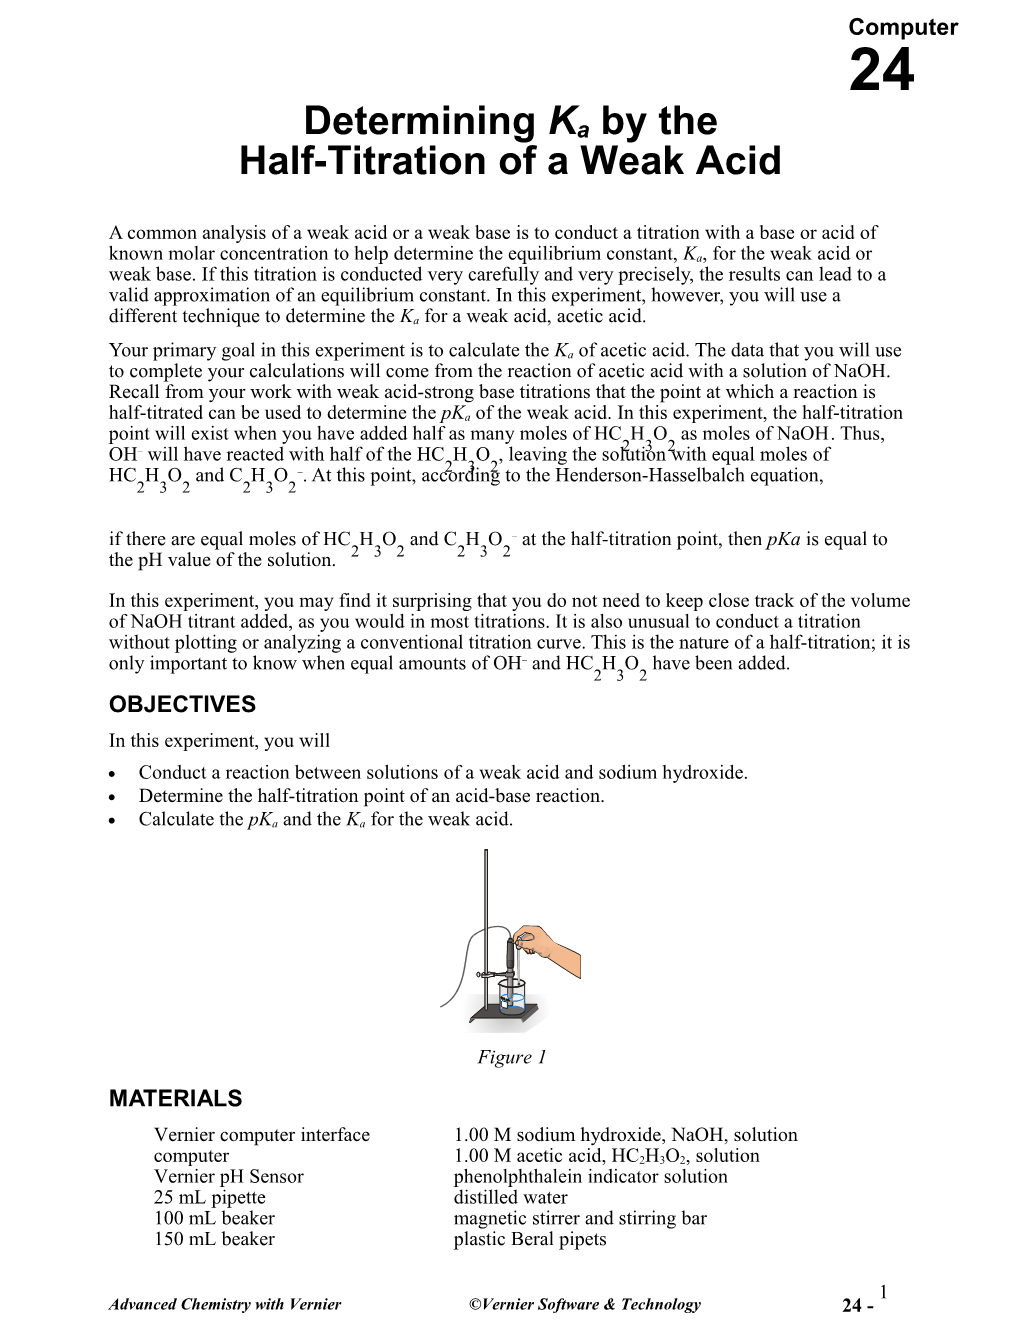 Determining Ka by the Half-Titration of a Weak Acid